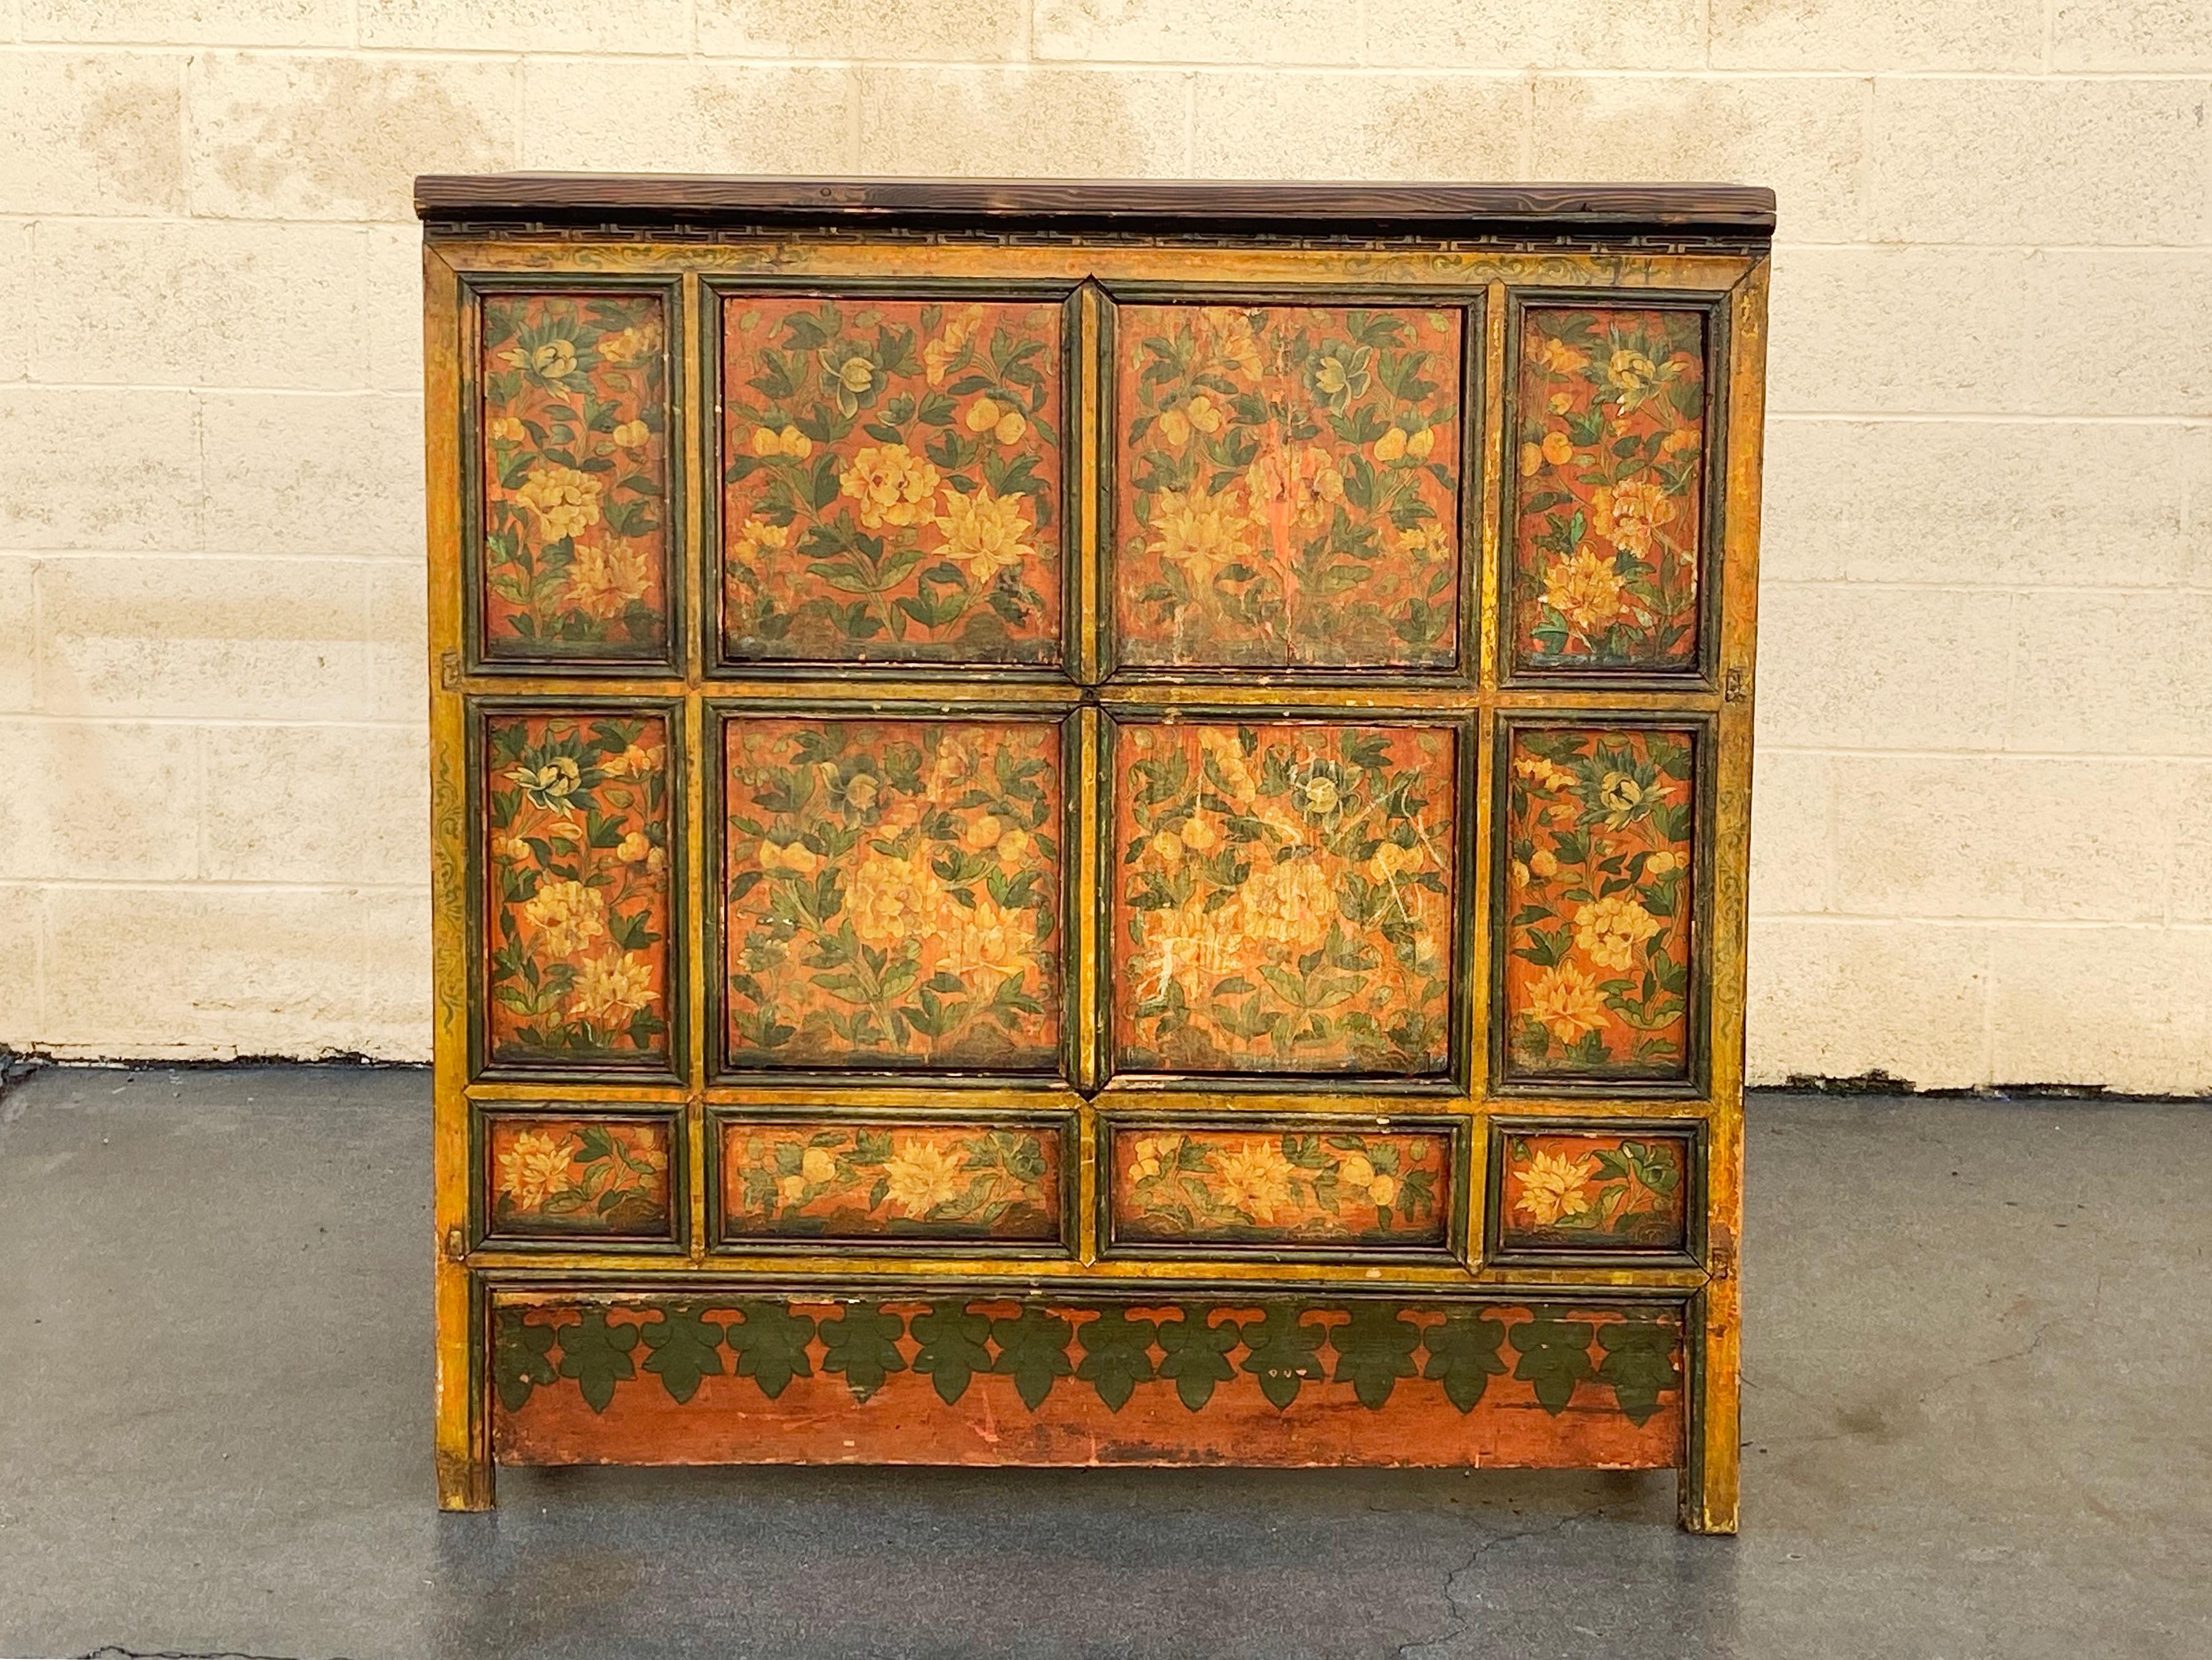 Antique hutch from India with beautiful Oriental inspired floral motif. Handmade with hand painted chrysanthemums and carved moulding. Features two shelves with double doors. 

Dimensions: 42.75